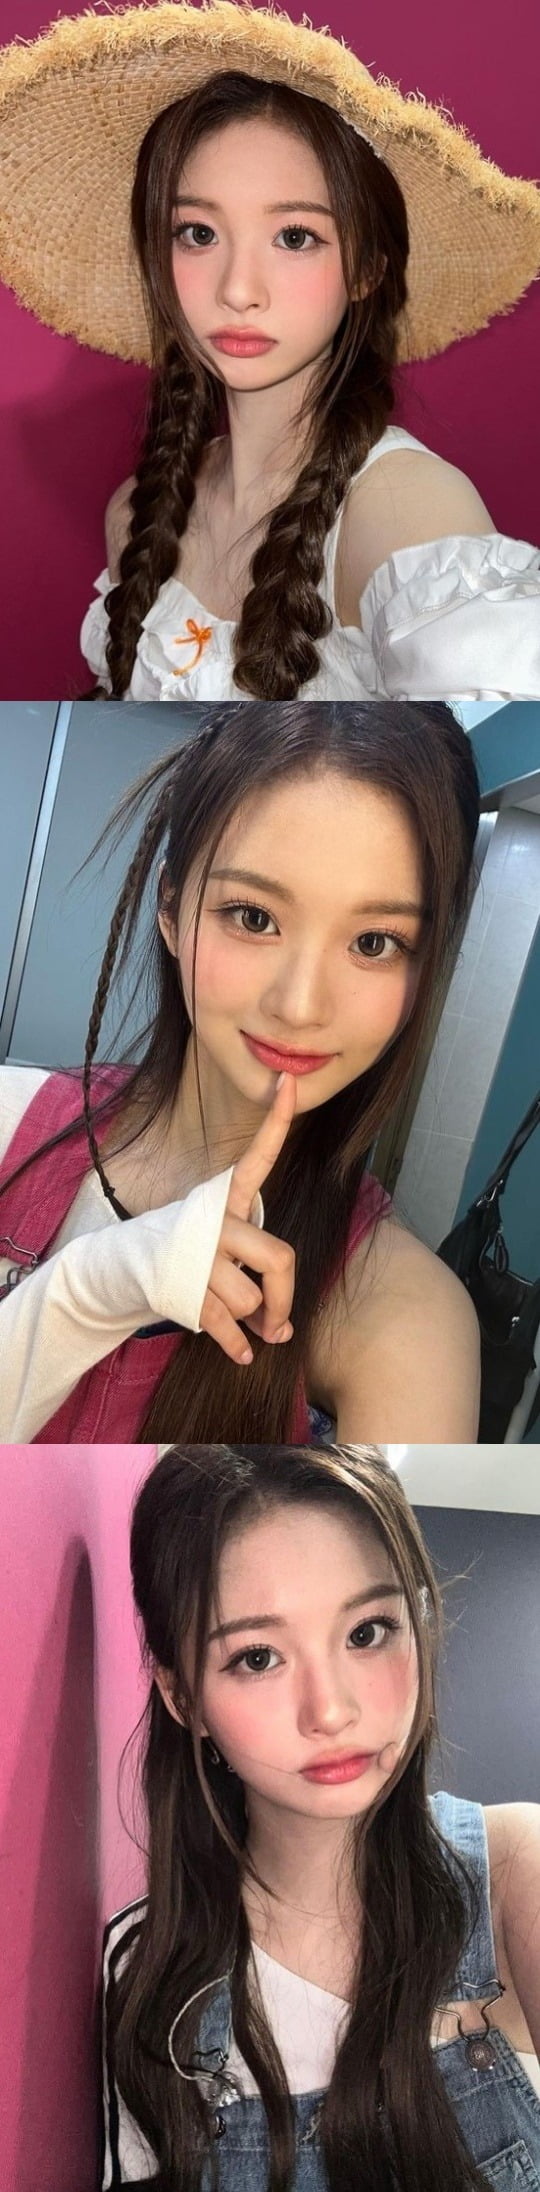 Enmix Seolyun told us whats going on.Seolyun posted a photo on the 27th in the Enmix official Instagram account with an article entitled A collection of last weeks selfies.The released photo shows Seolyun showing off her beautiful visuals.On the other hand, Seolyuns group Enmix released its mini album  ⁇ expérgo ⁇  on the 20th.